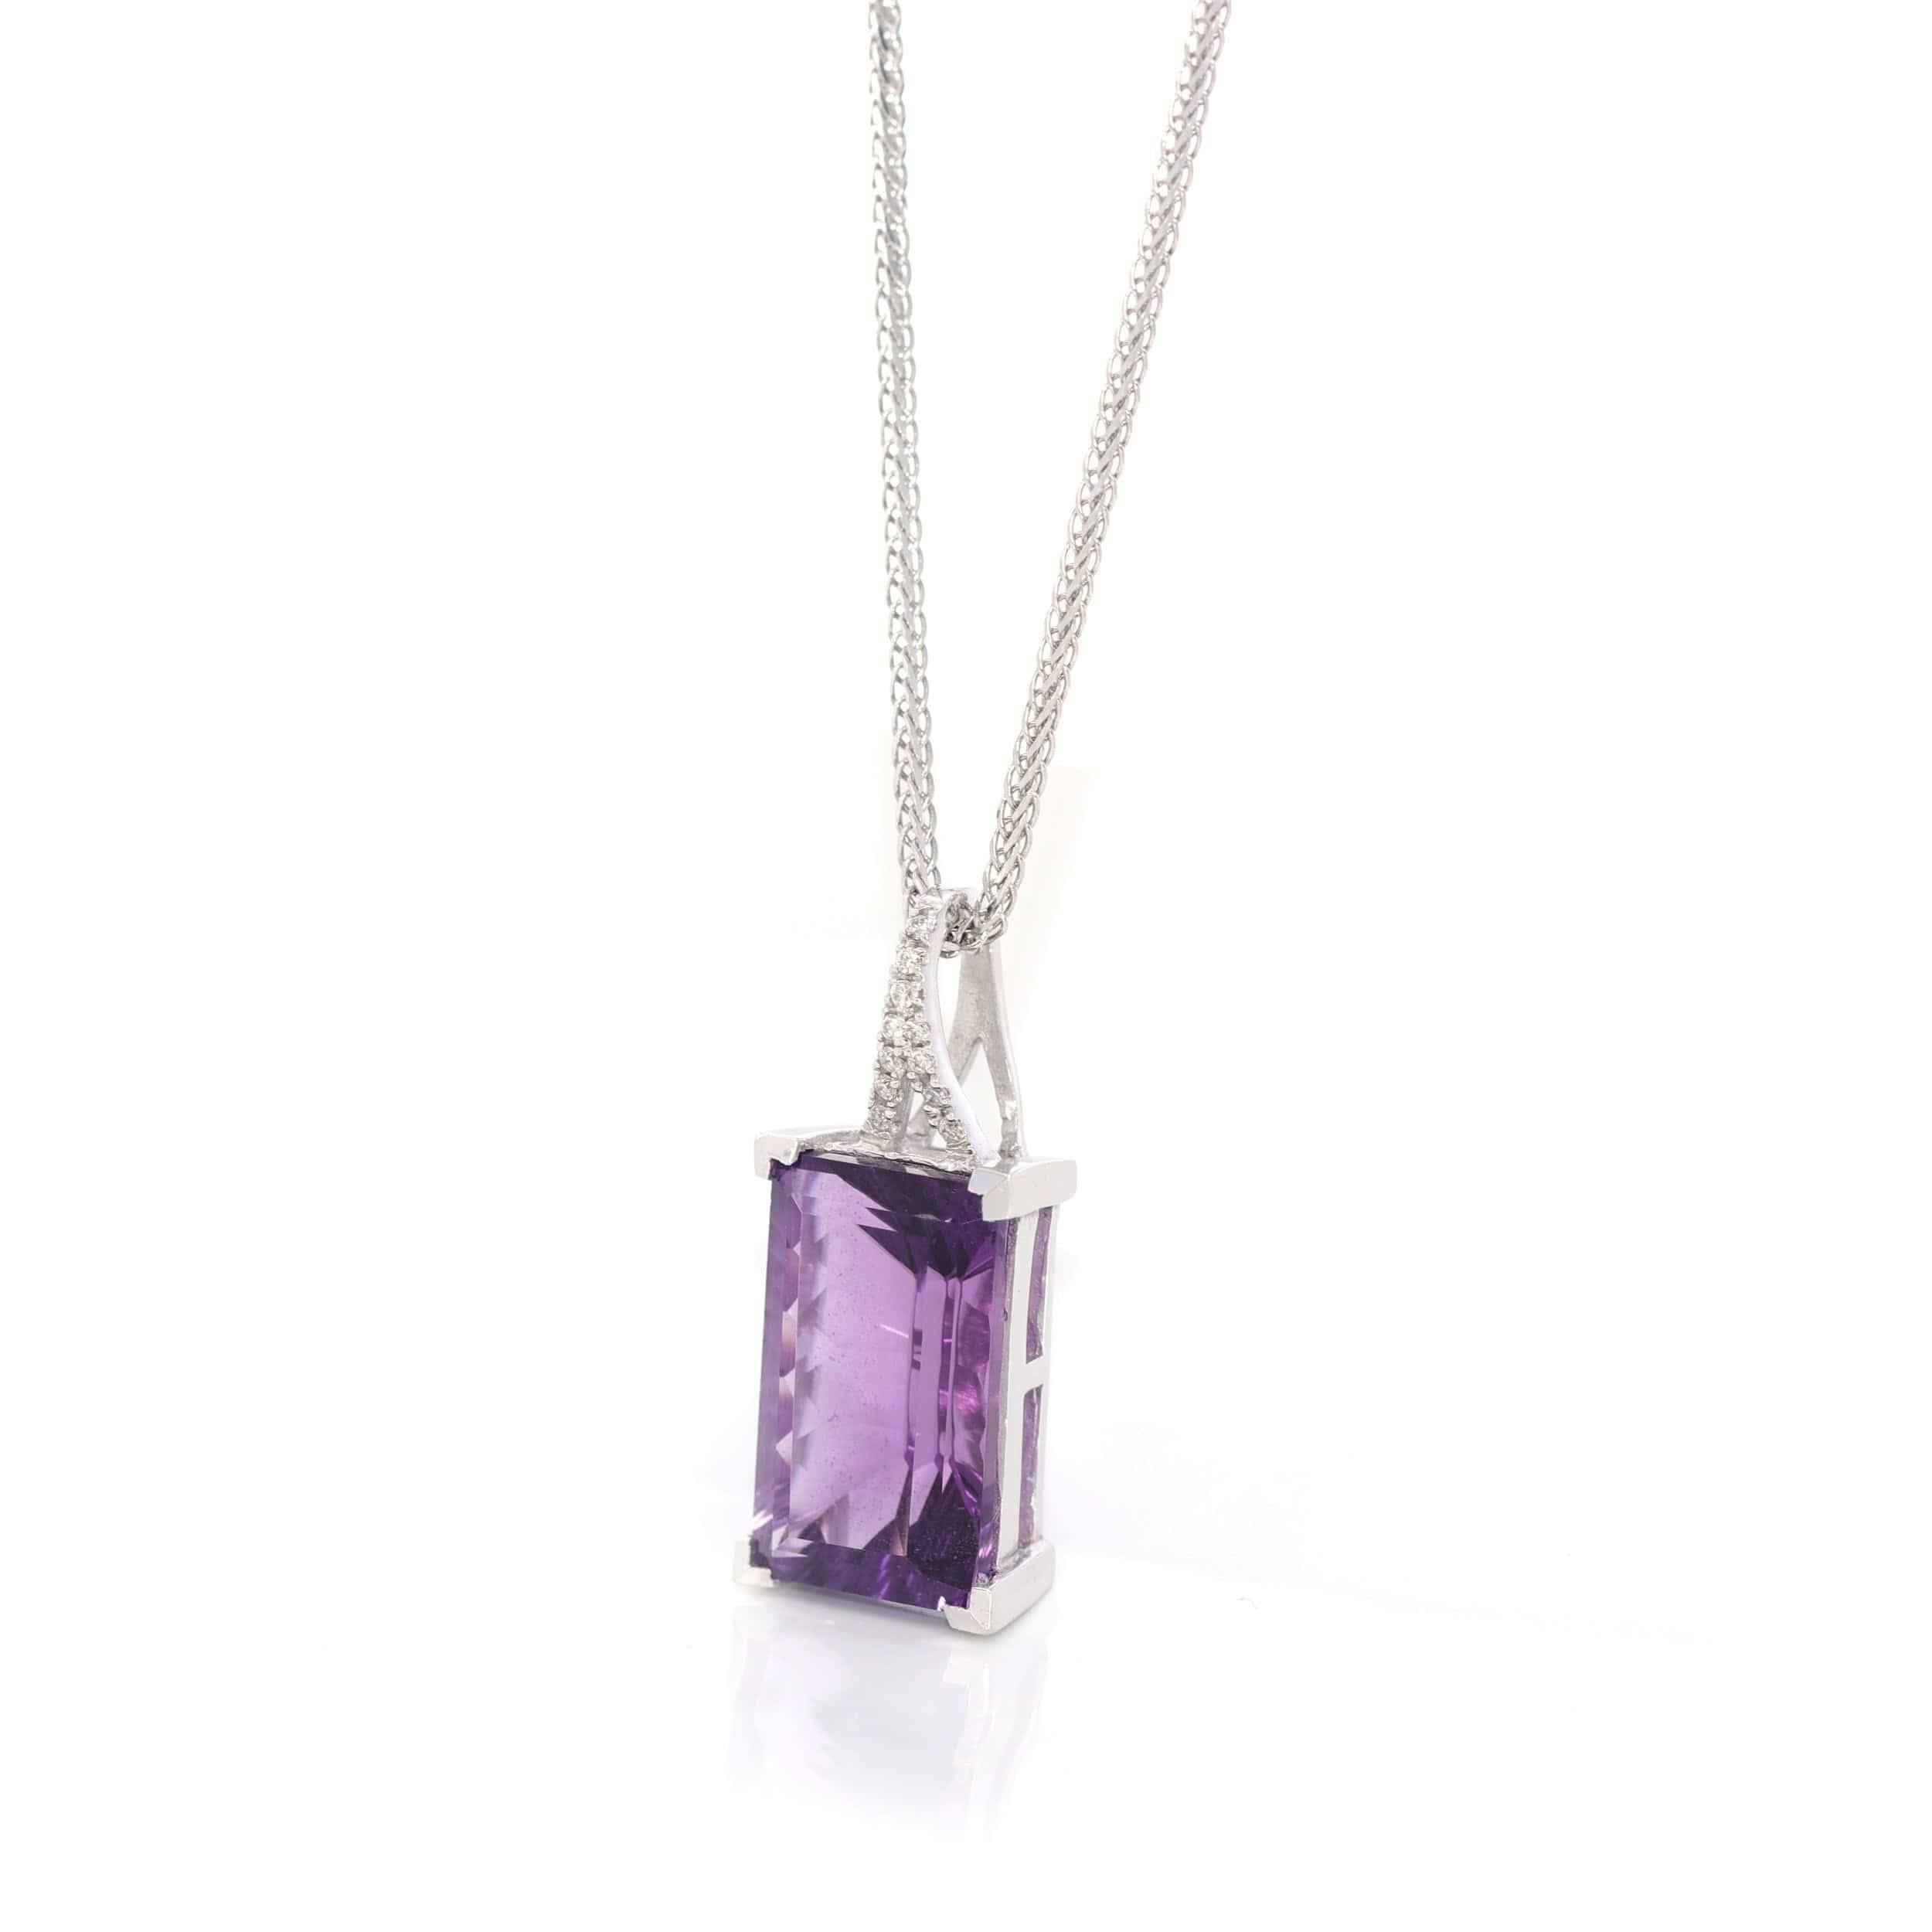 * INTRODUCTION----- This pendant is made with high-quality genuine 5.84ct AAA nice purple amethyst & SI genuine diamonds. It looks so royal and exquisite. The luxury purple color stands out like no other. And the whole amethyst is so vibrant. The